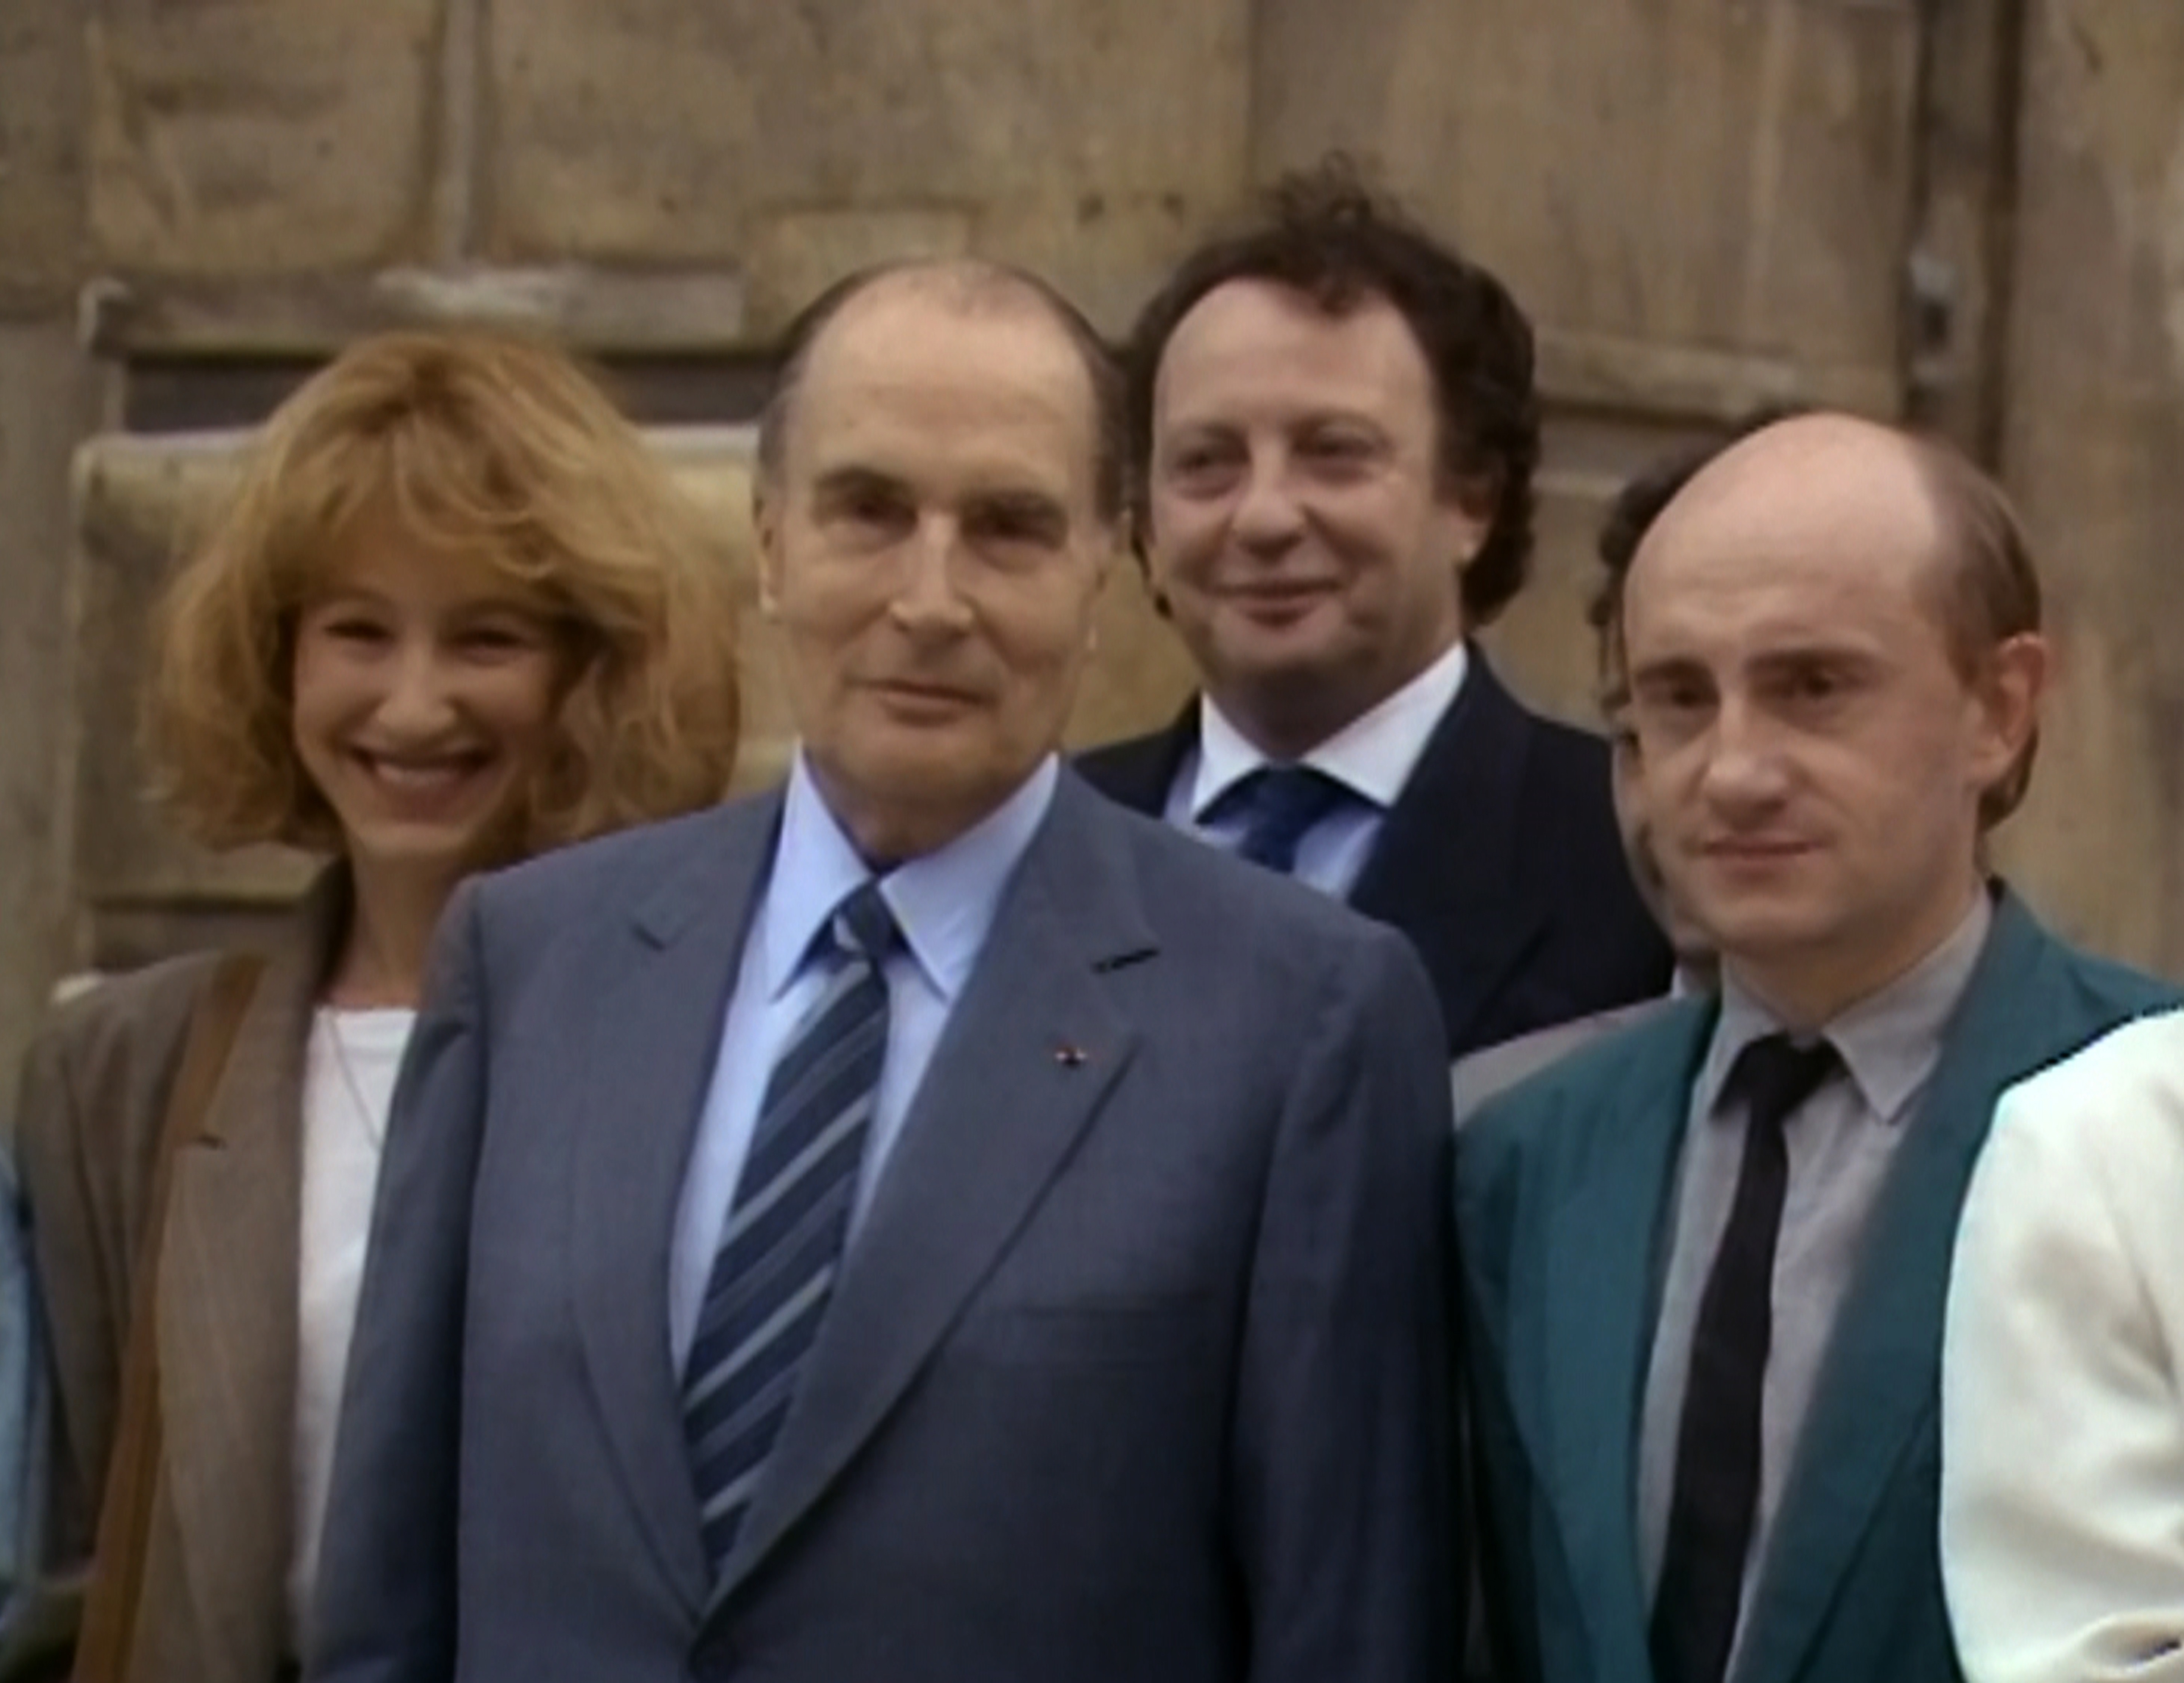 THE ARTISTS DURING THE MITTERRAND ERA